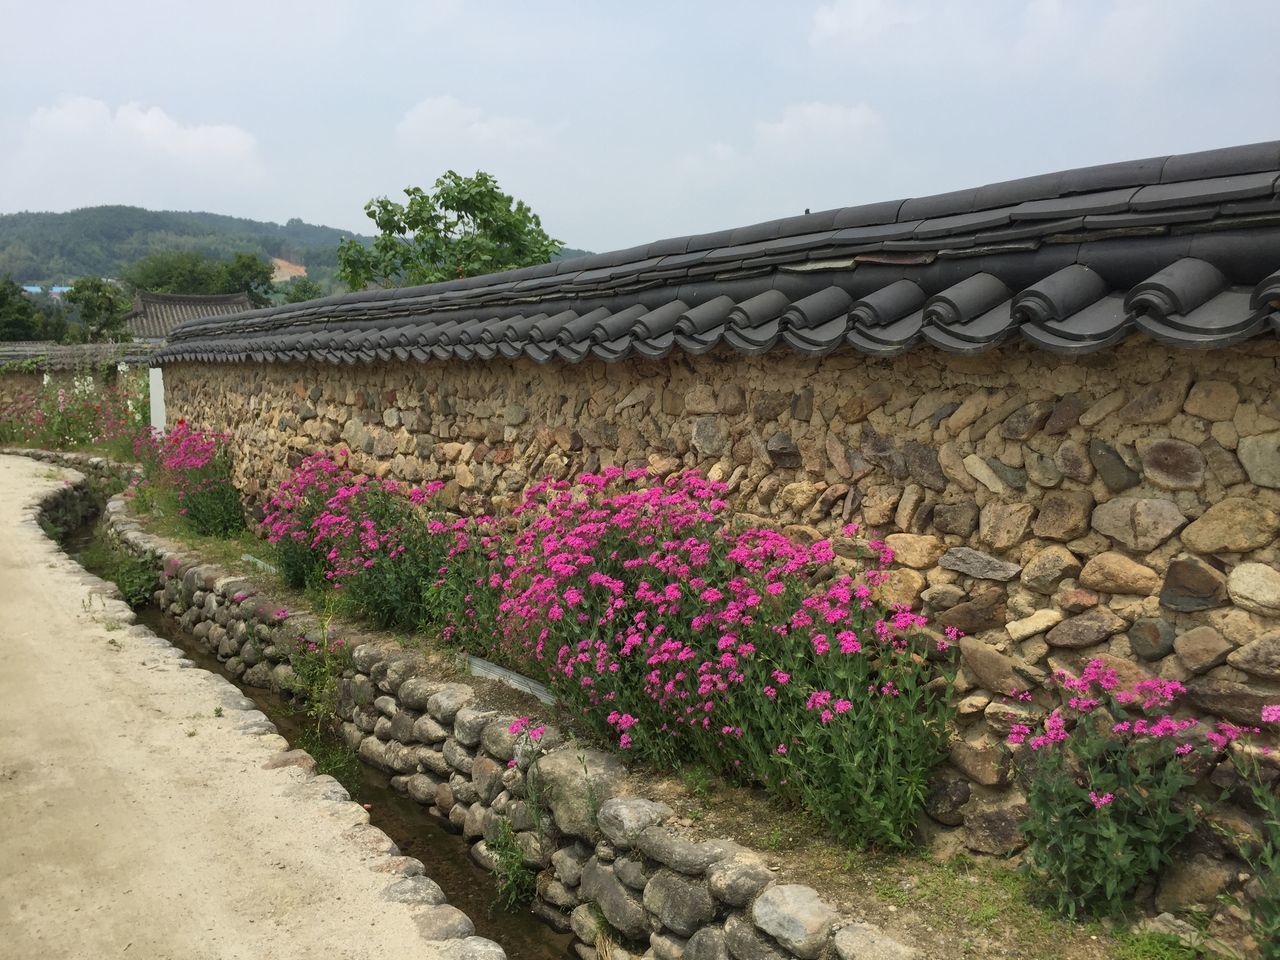 PINK FLOWERING PLANTS AGAINST STONE WALL